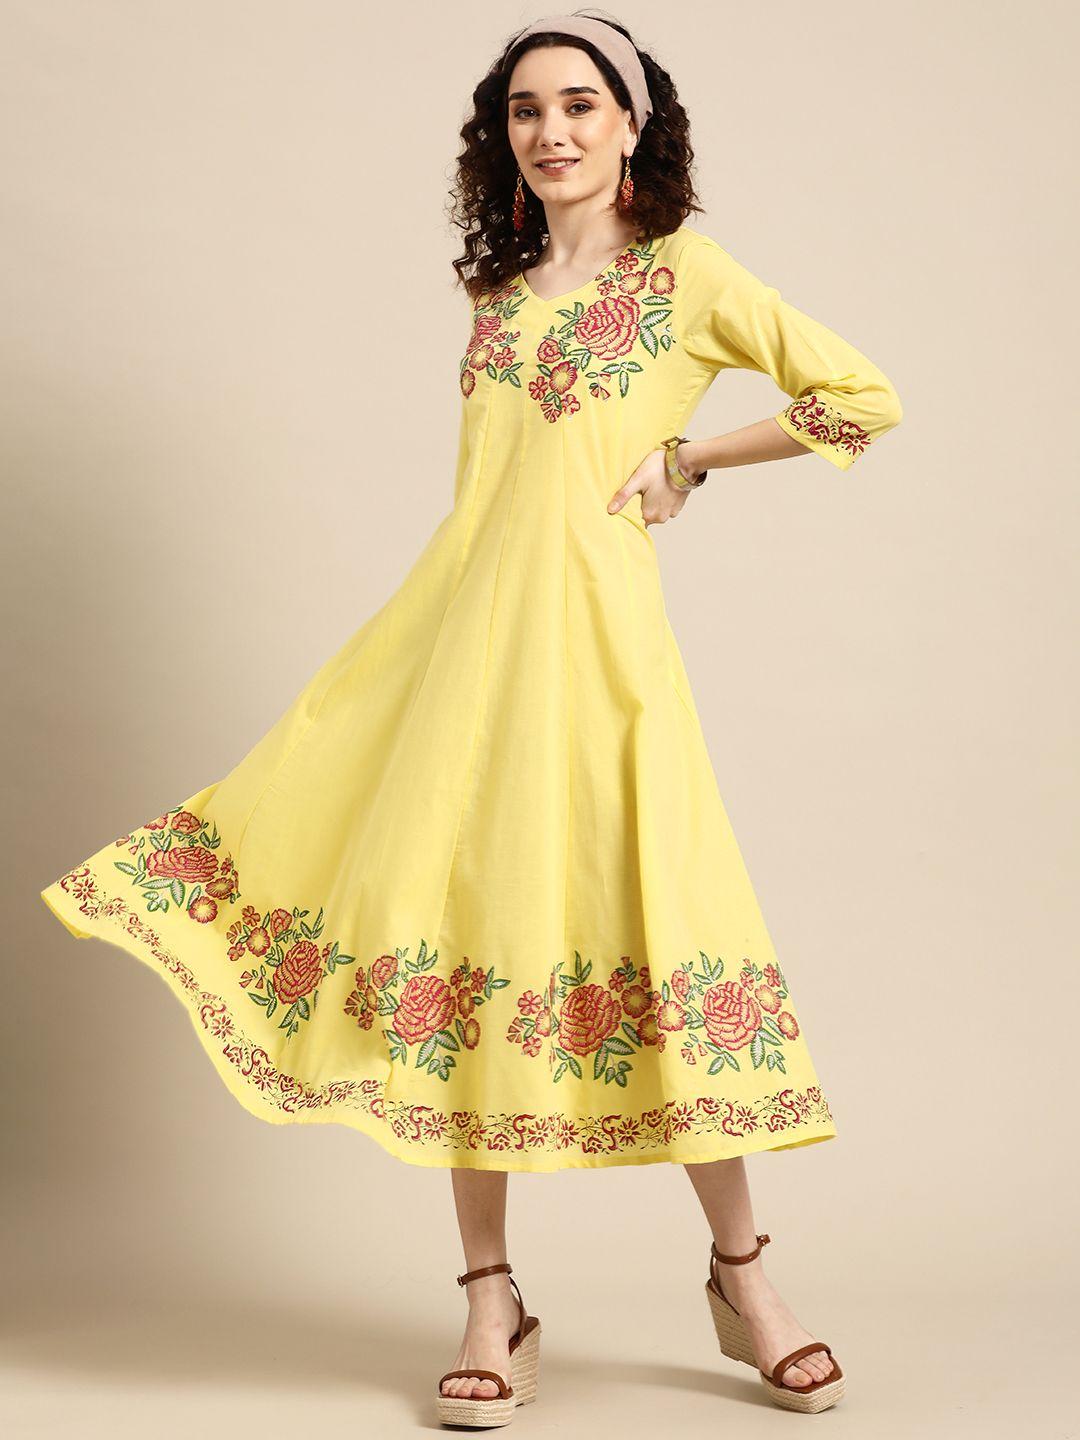 sangria yellow floral embroidered ethnic maxi dress